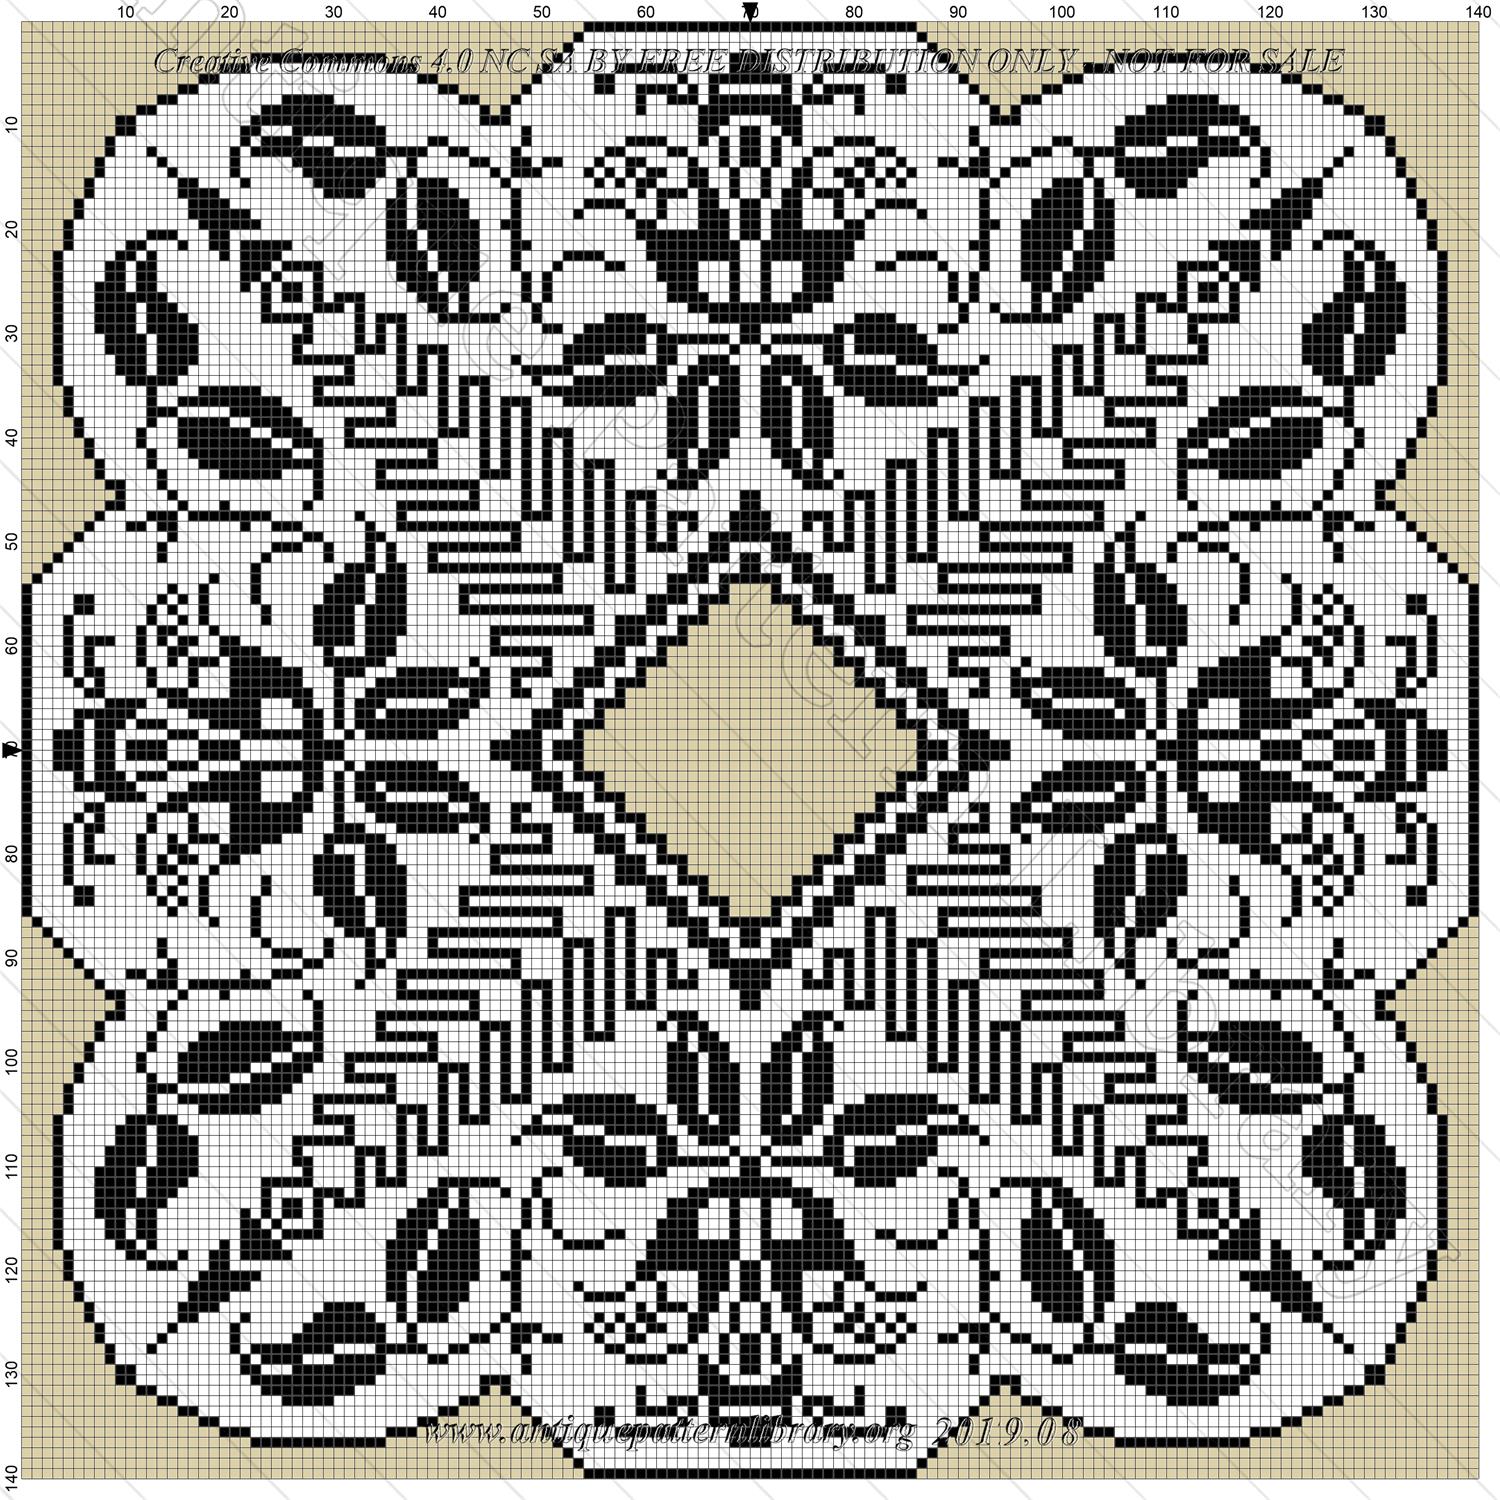 I-LZ001 Filet or embroidery design for a doily or doily edging